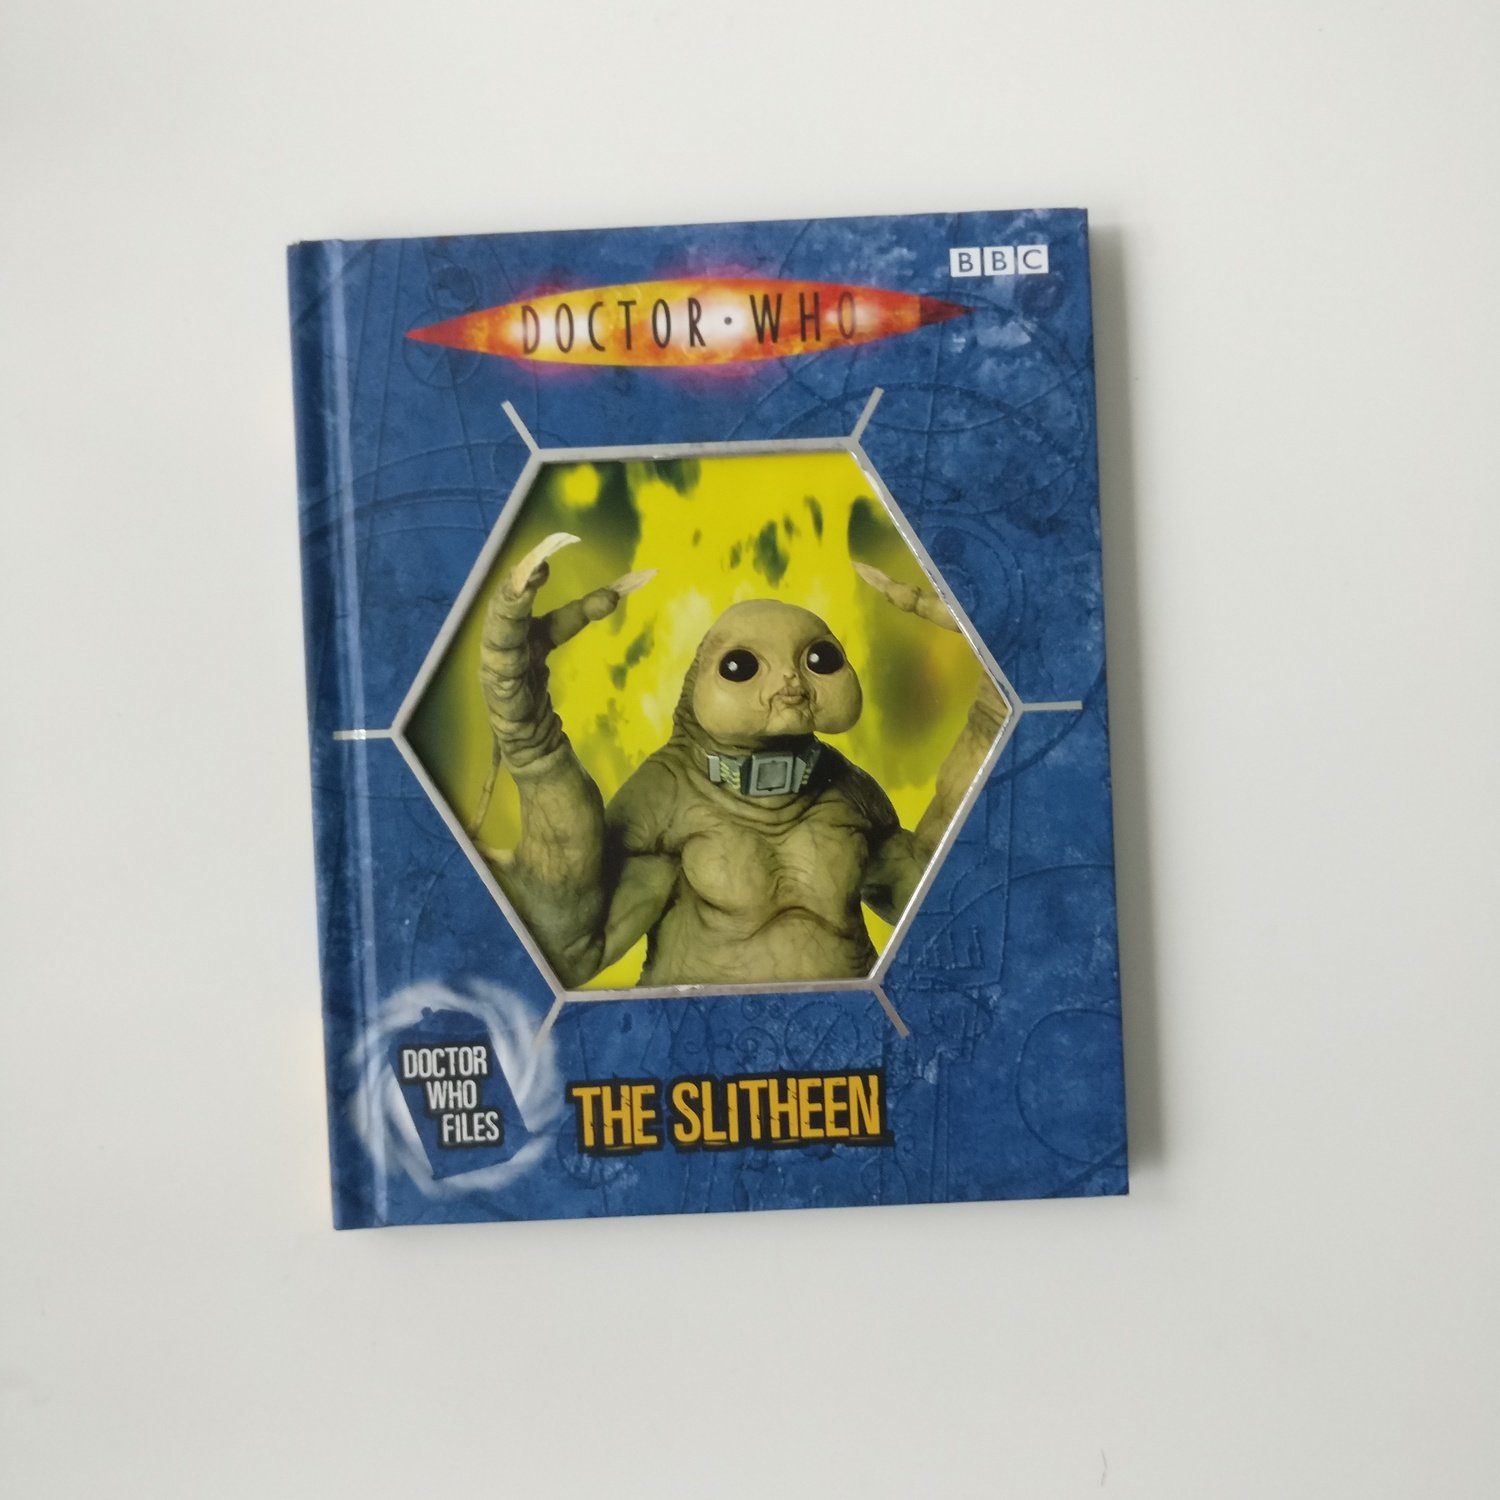 Doctor Who / Dr Who Notebook - The Slitheen